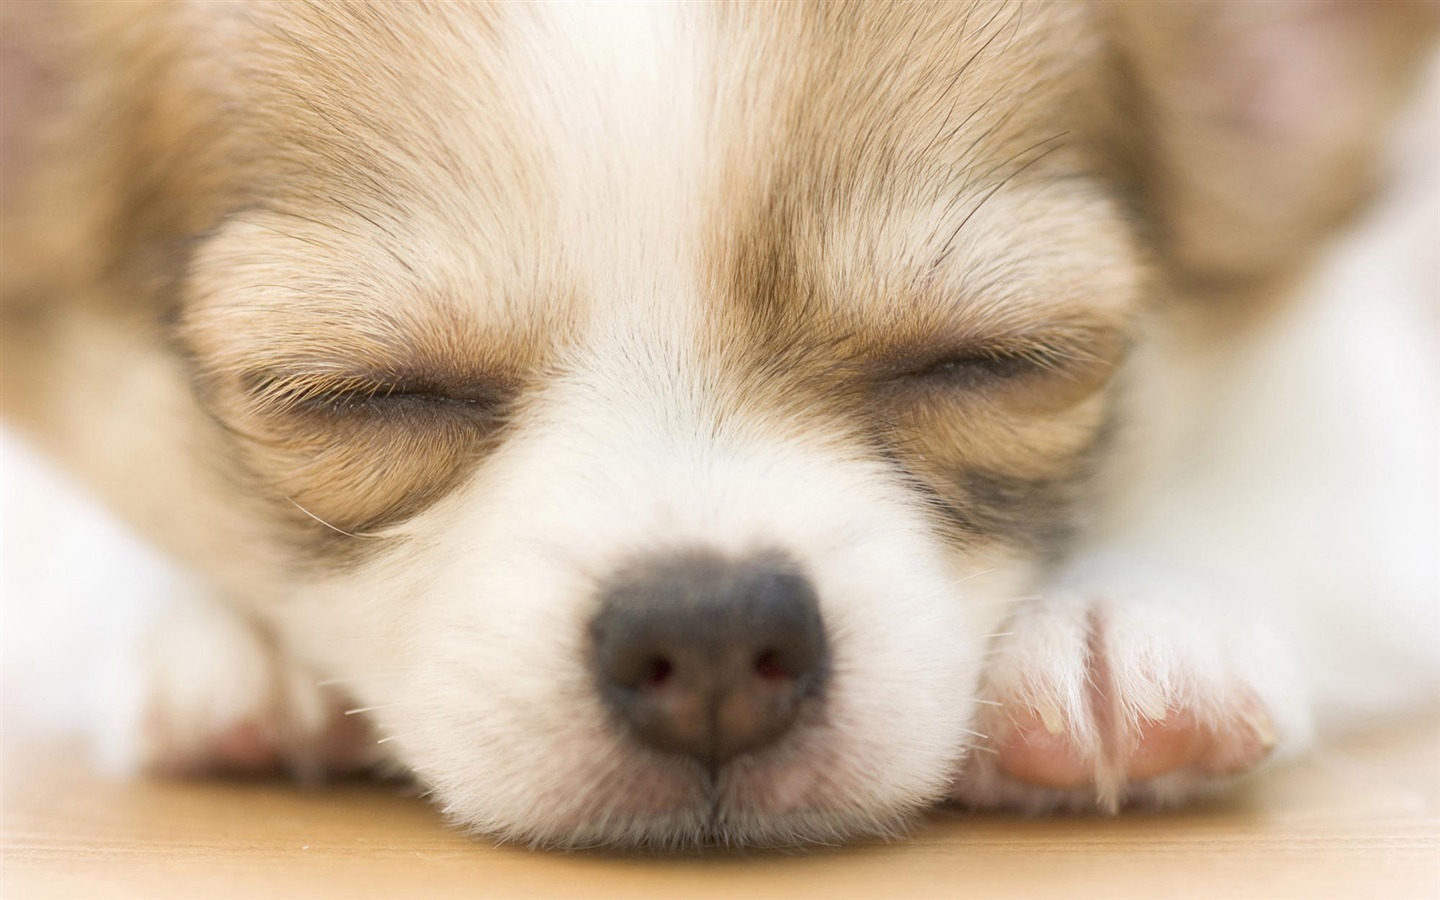 Puppy Photo HD wallpapers (9) #9 - 1440x900